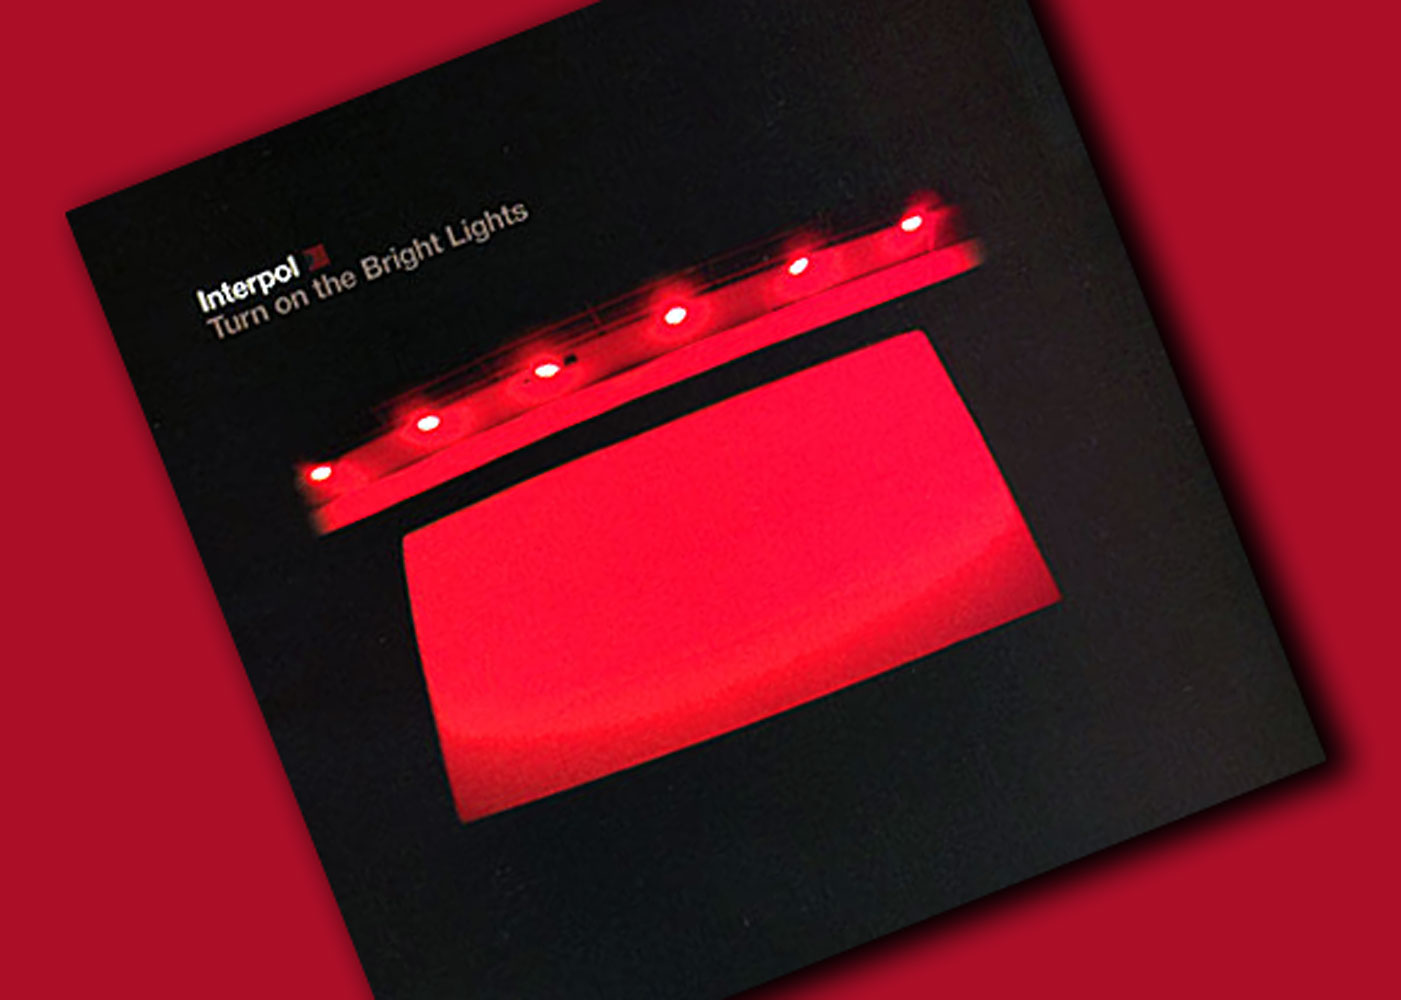 interpol turn on the bright lights album covers